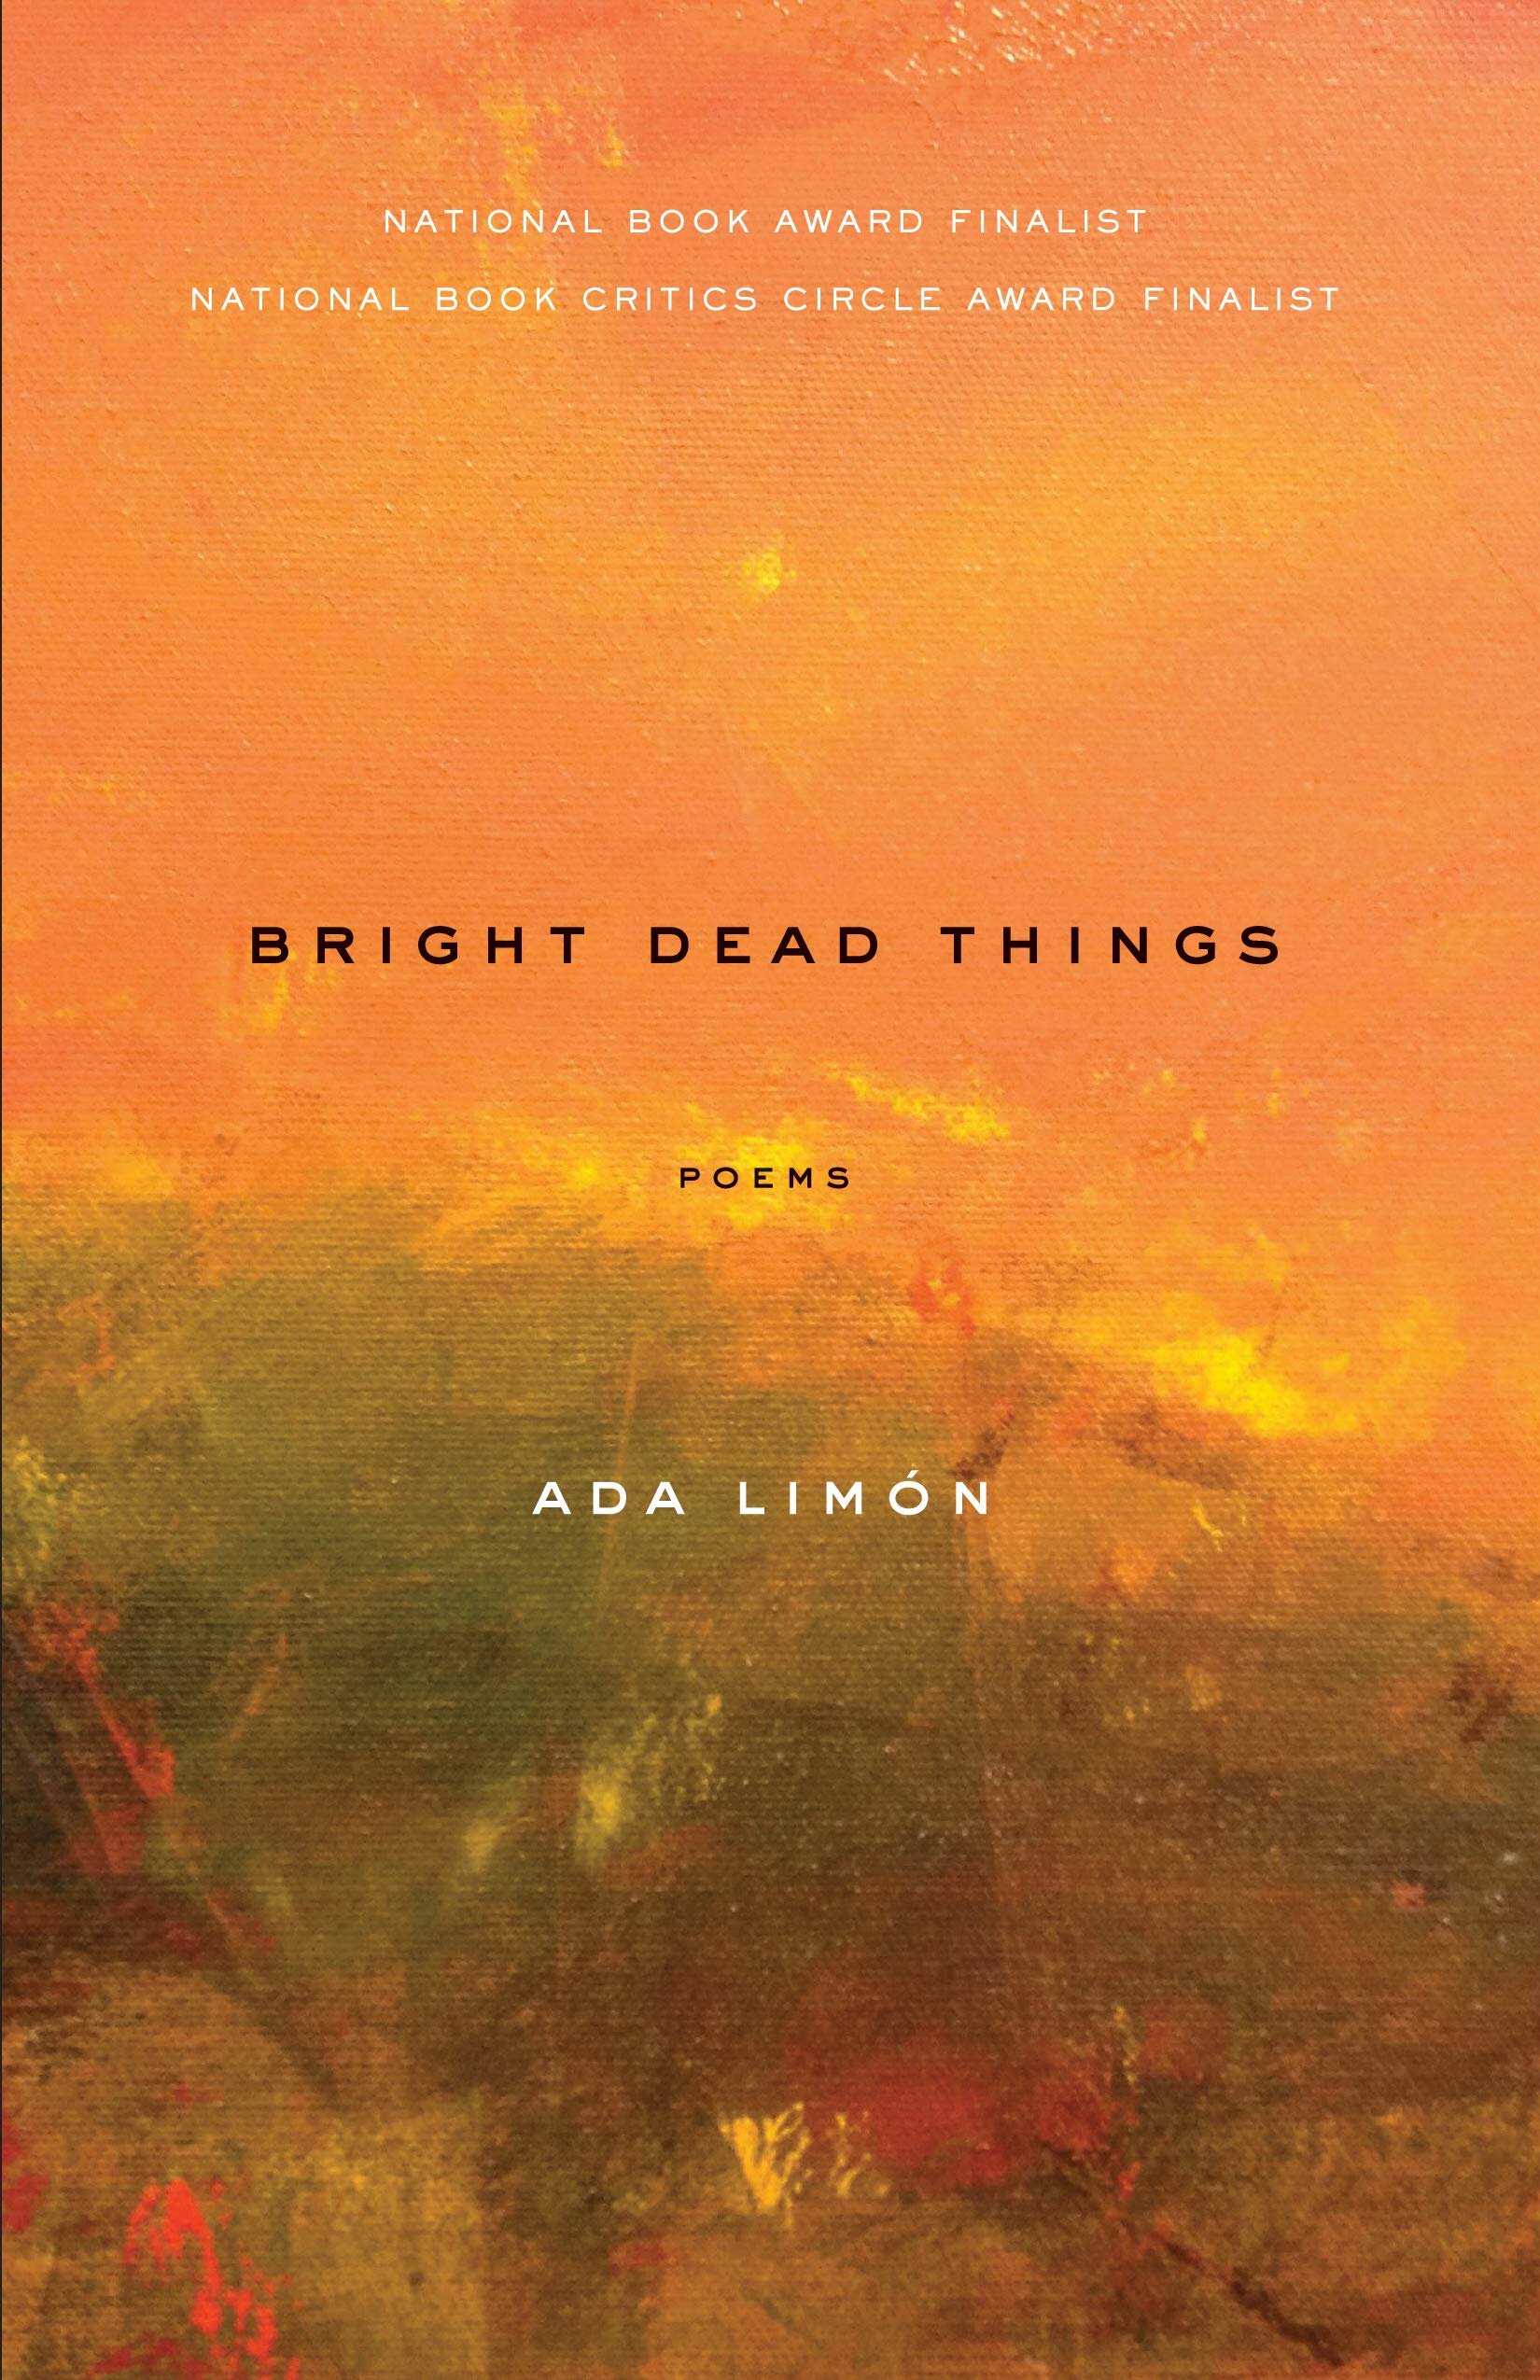 Bright Dead Things by Ada Limoncellos